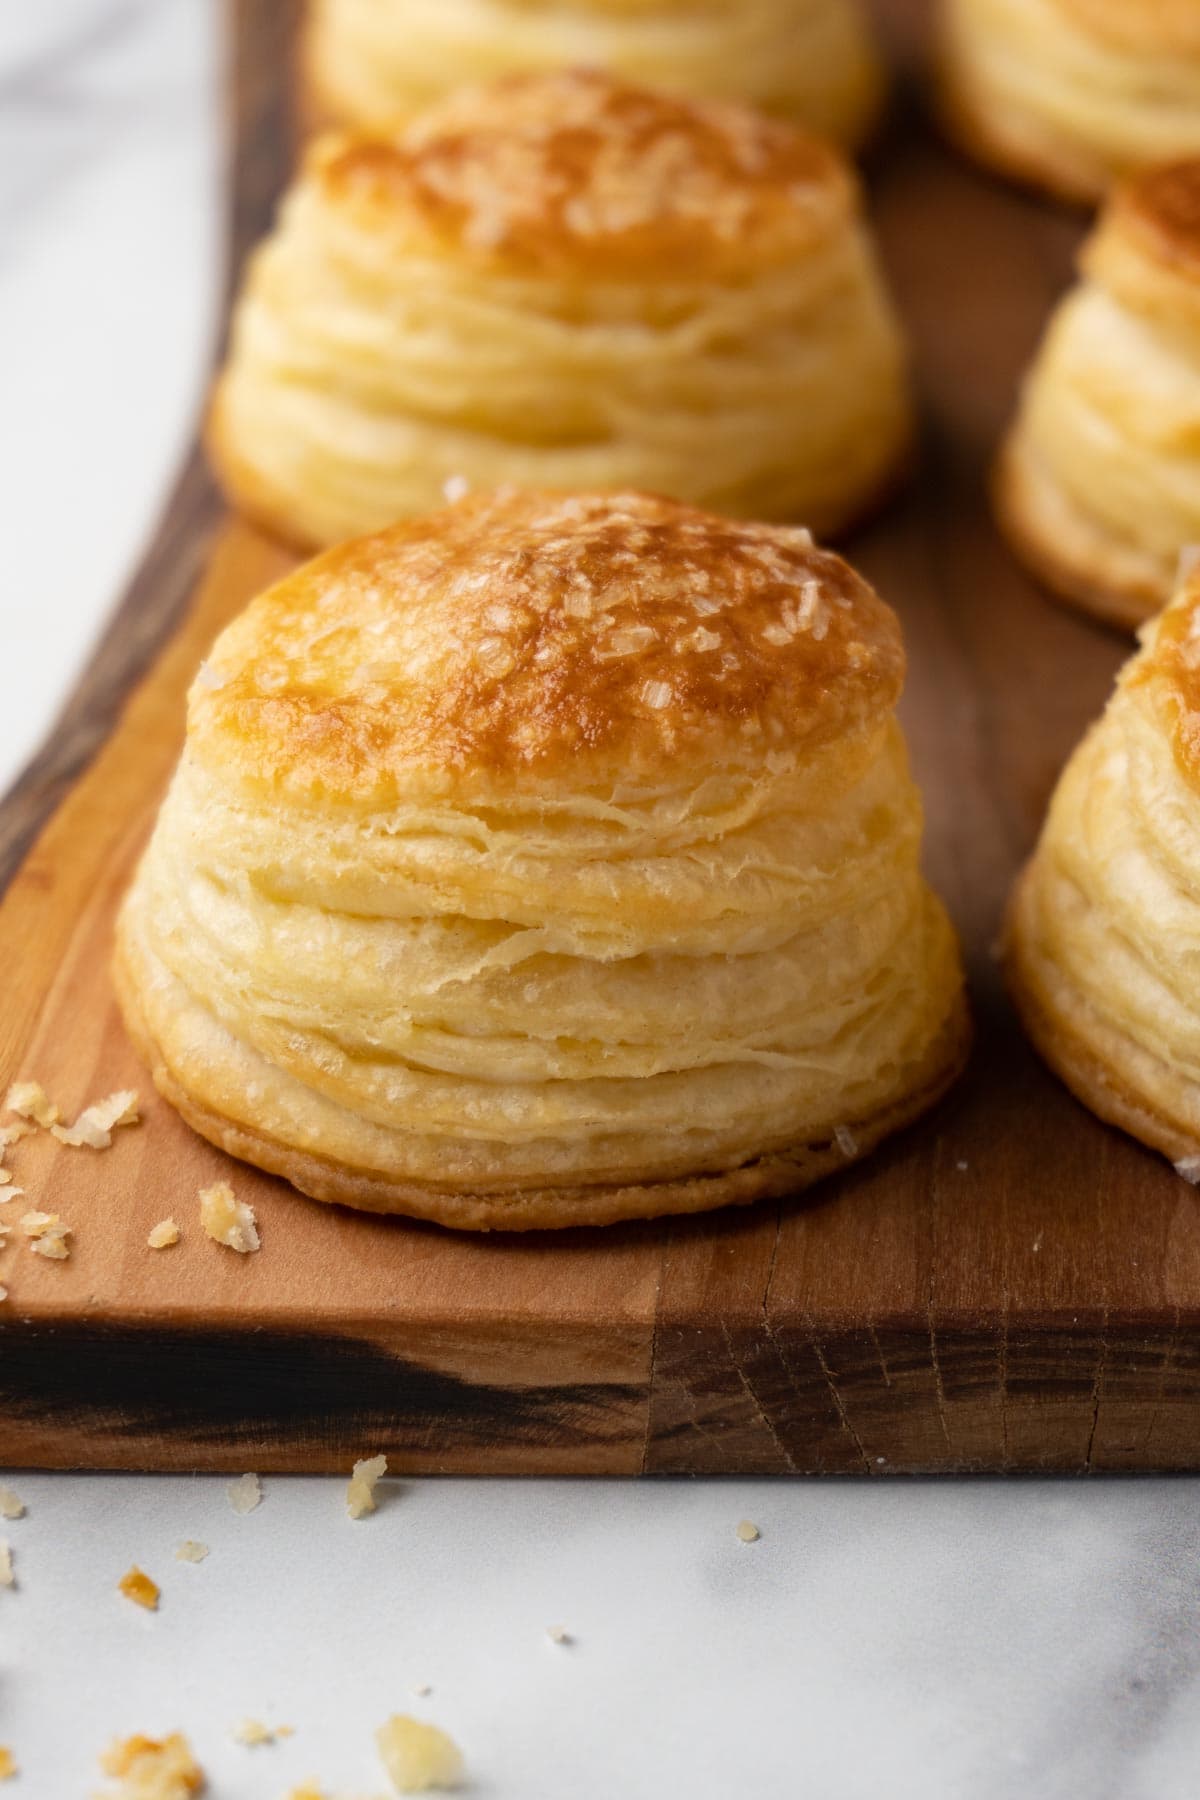 A freshly baked pieces of homemade puff pastry topped with sea salt flakes served on a wooden board.